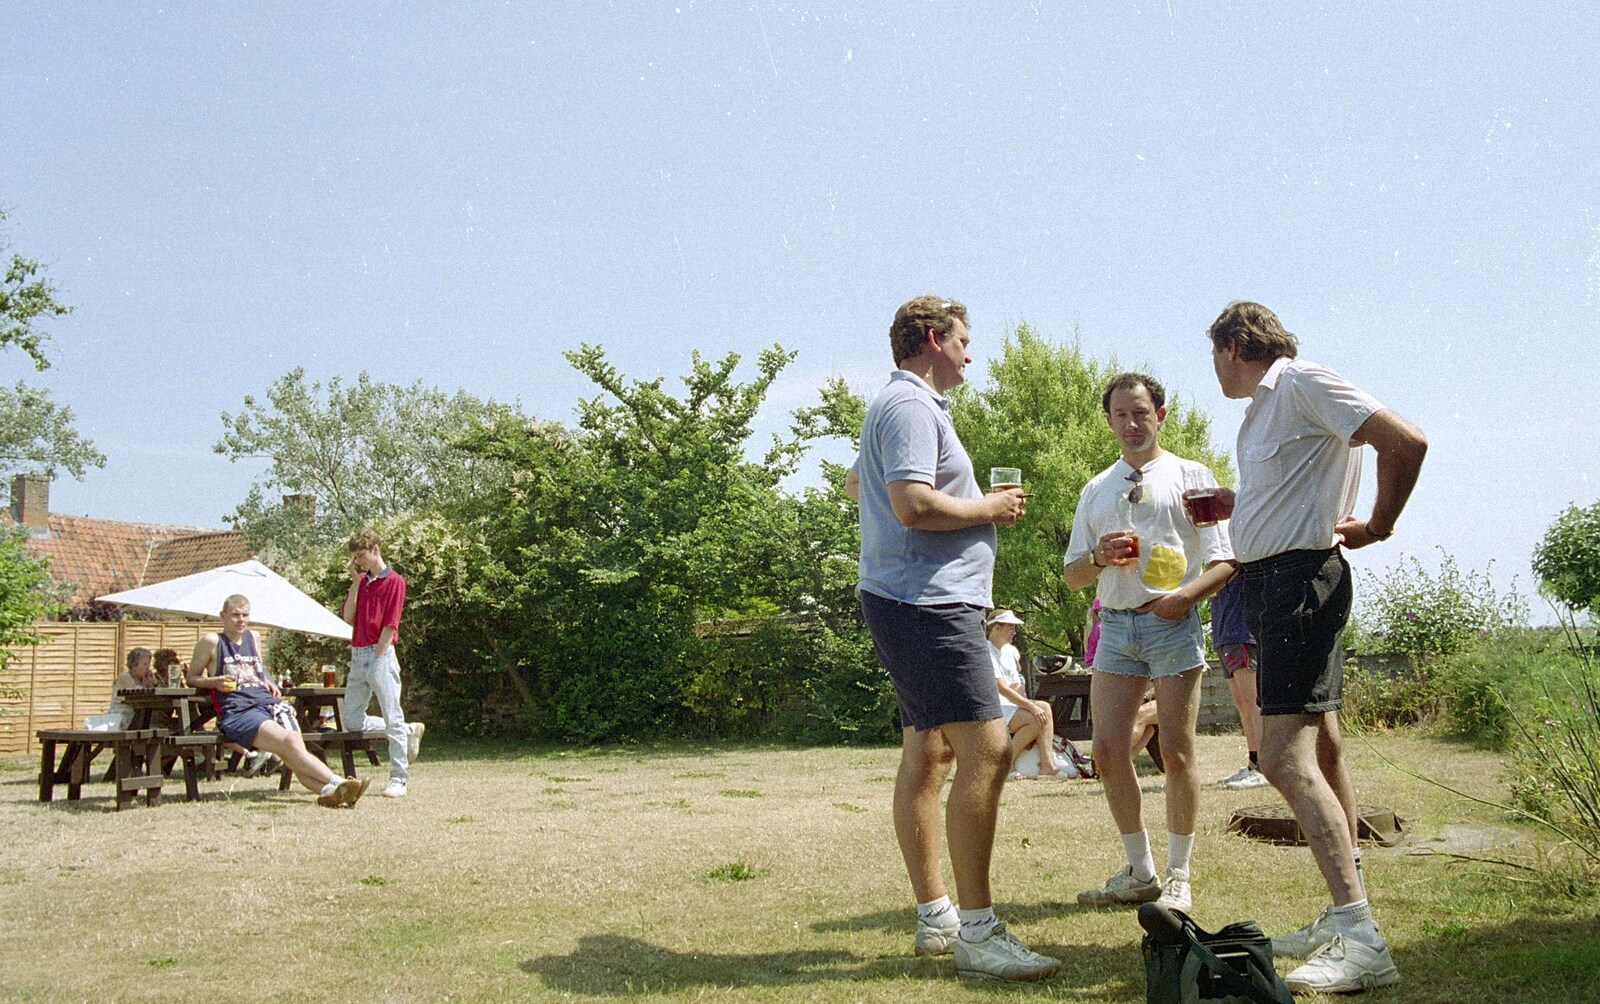 Philip, DH and Alan talk about stuff from The First BSCC Bike Ride to Southwold, Suffolk - 10th June 1996